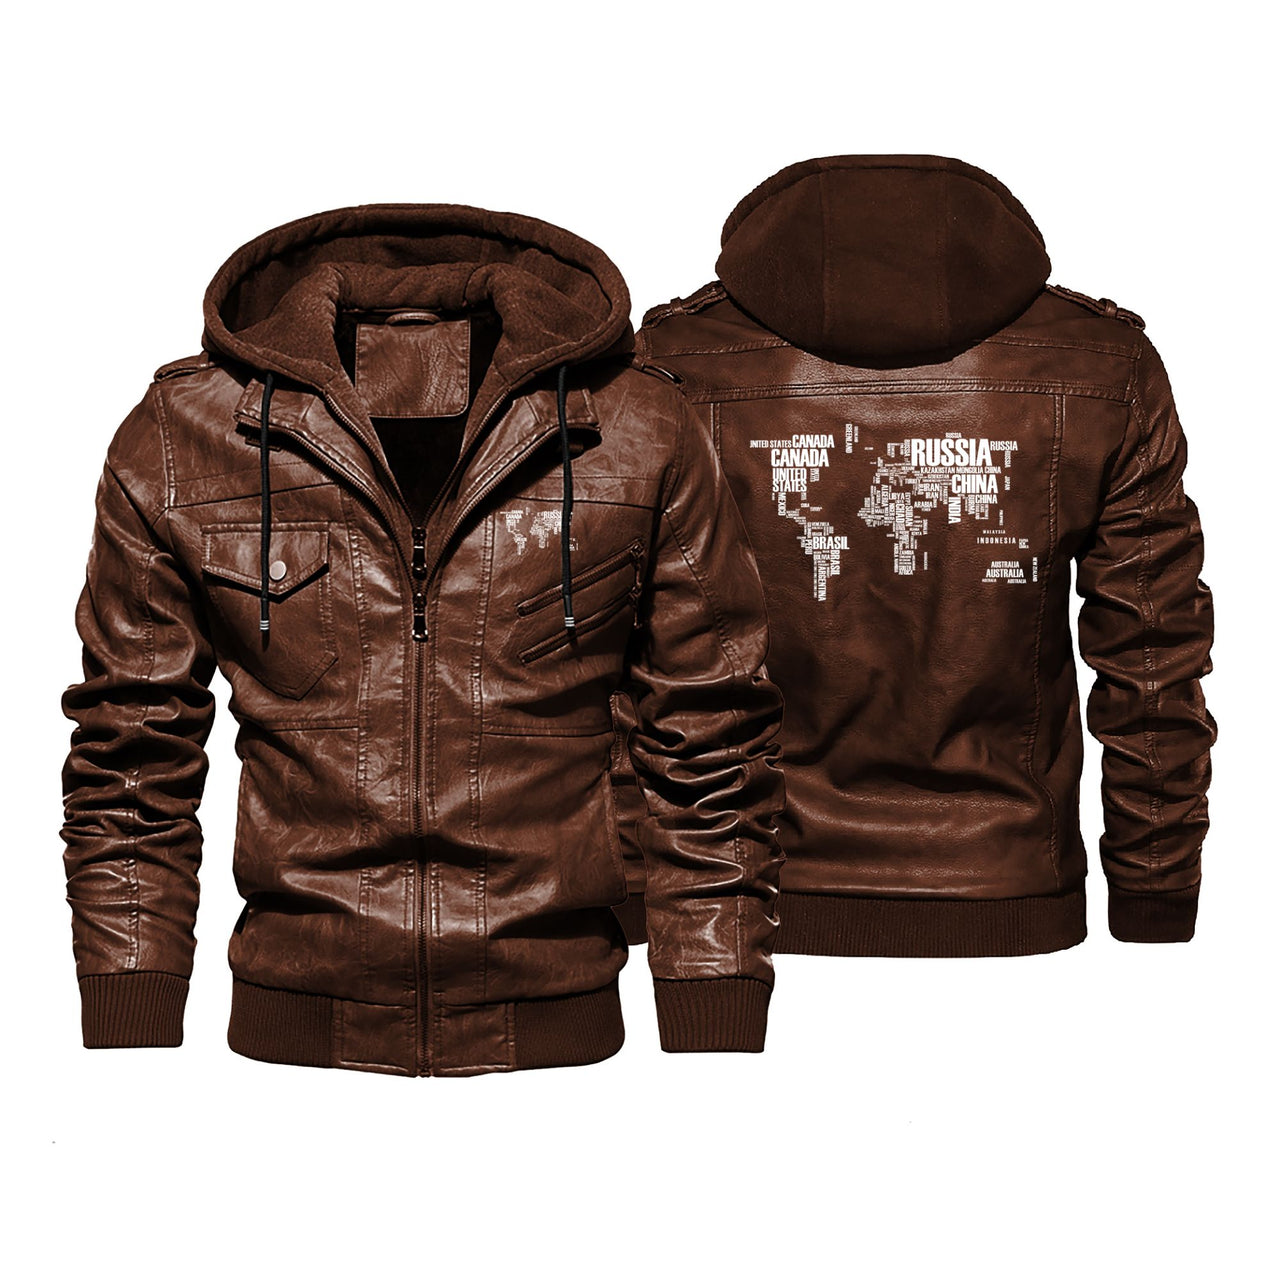 World Map (Text) Designed Hooded Leather Jackets